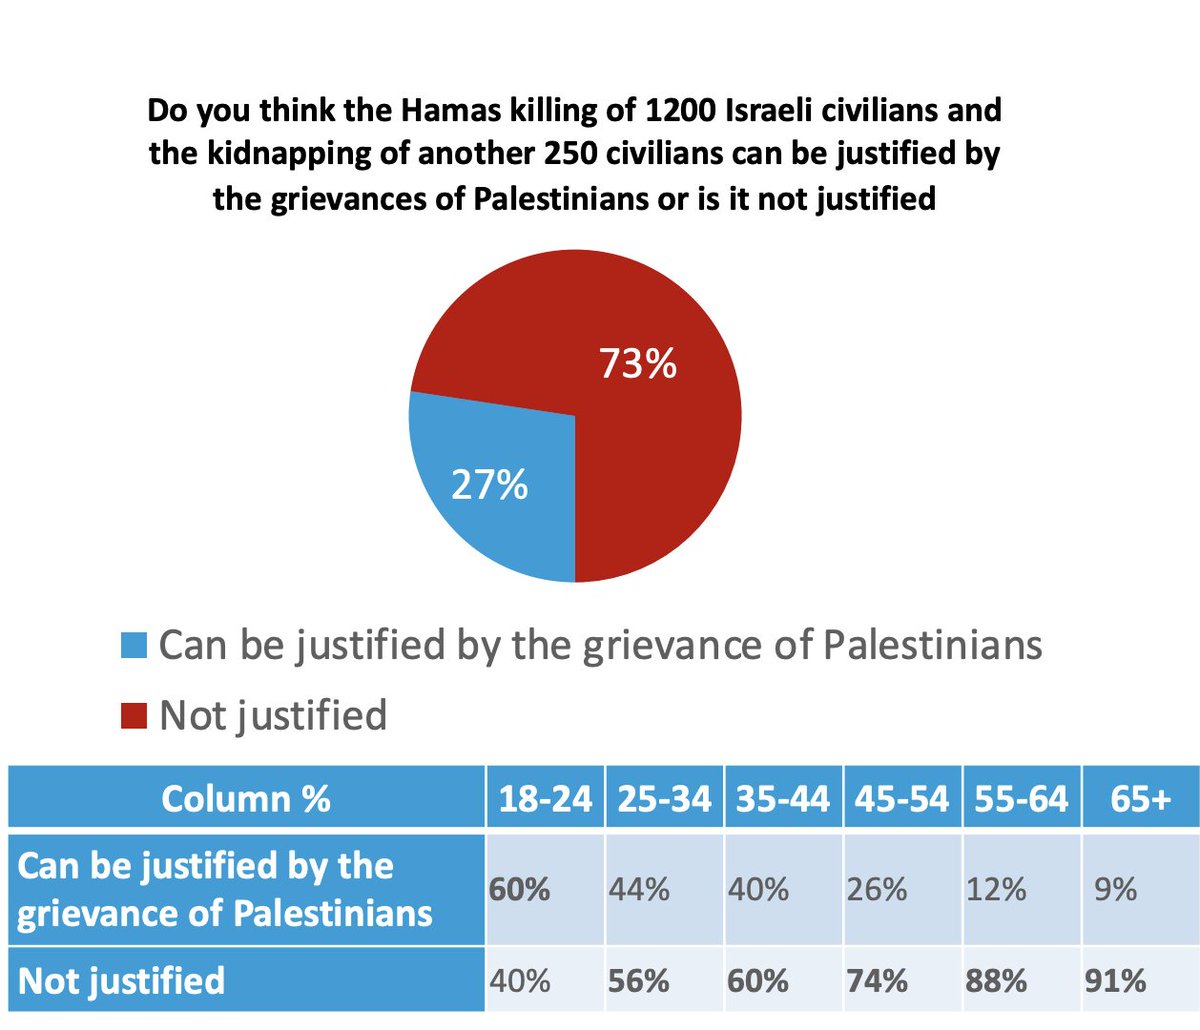 New Harvard/Harris poll results: 67% of respondents aged 18-24 agree that 'Jews as a class are oppressors and should be treated as oppressors,' 60% of respondents aged 18-24 agree that Hamas’ October 7th massacre can be justified by the grievances of Palestinians, and 31% of